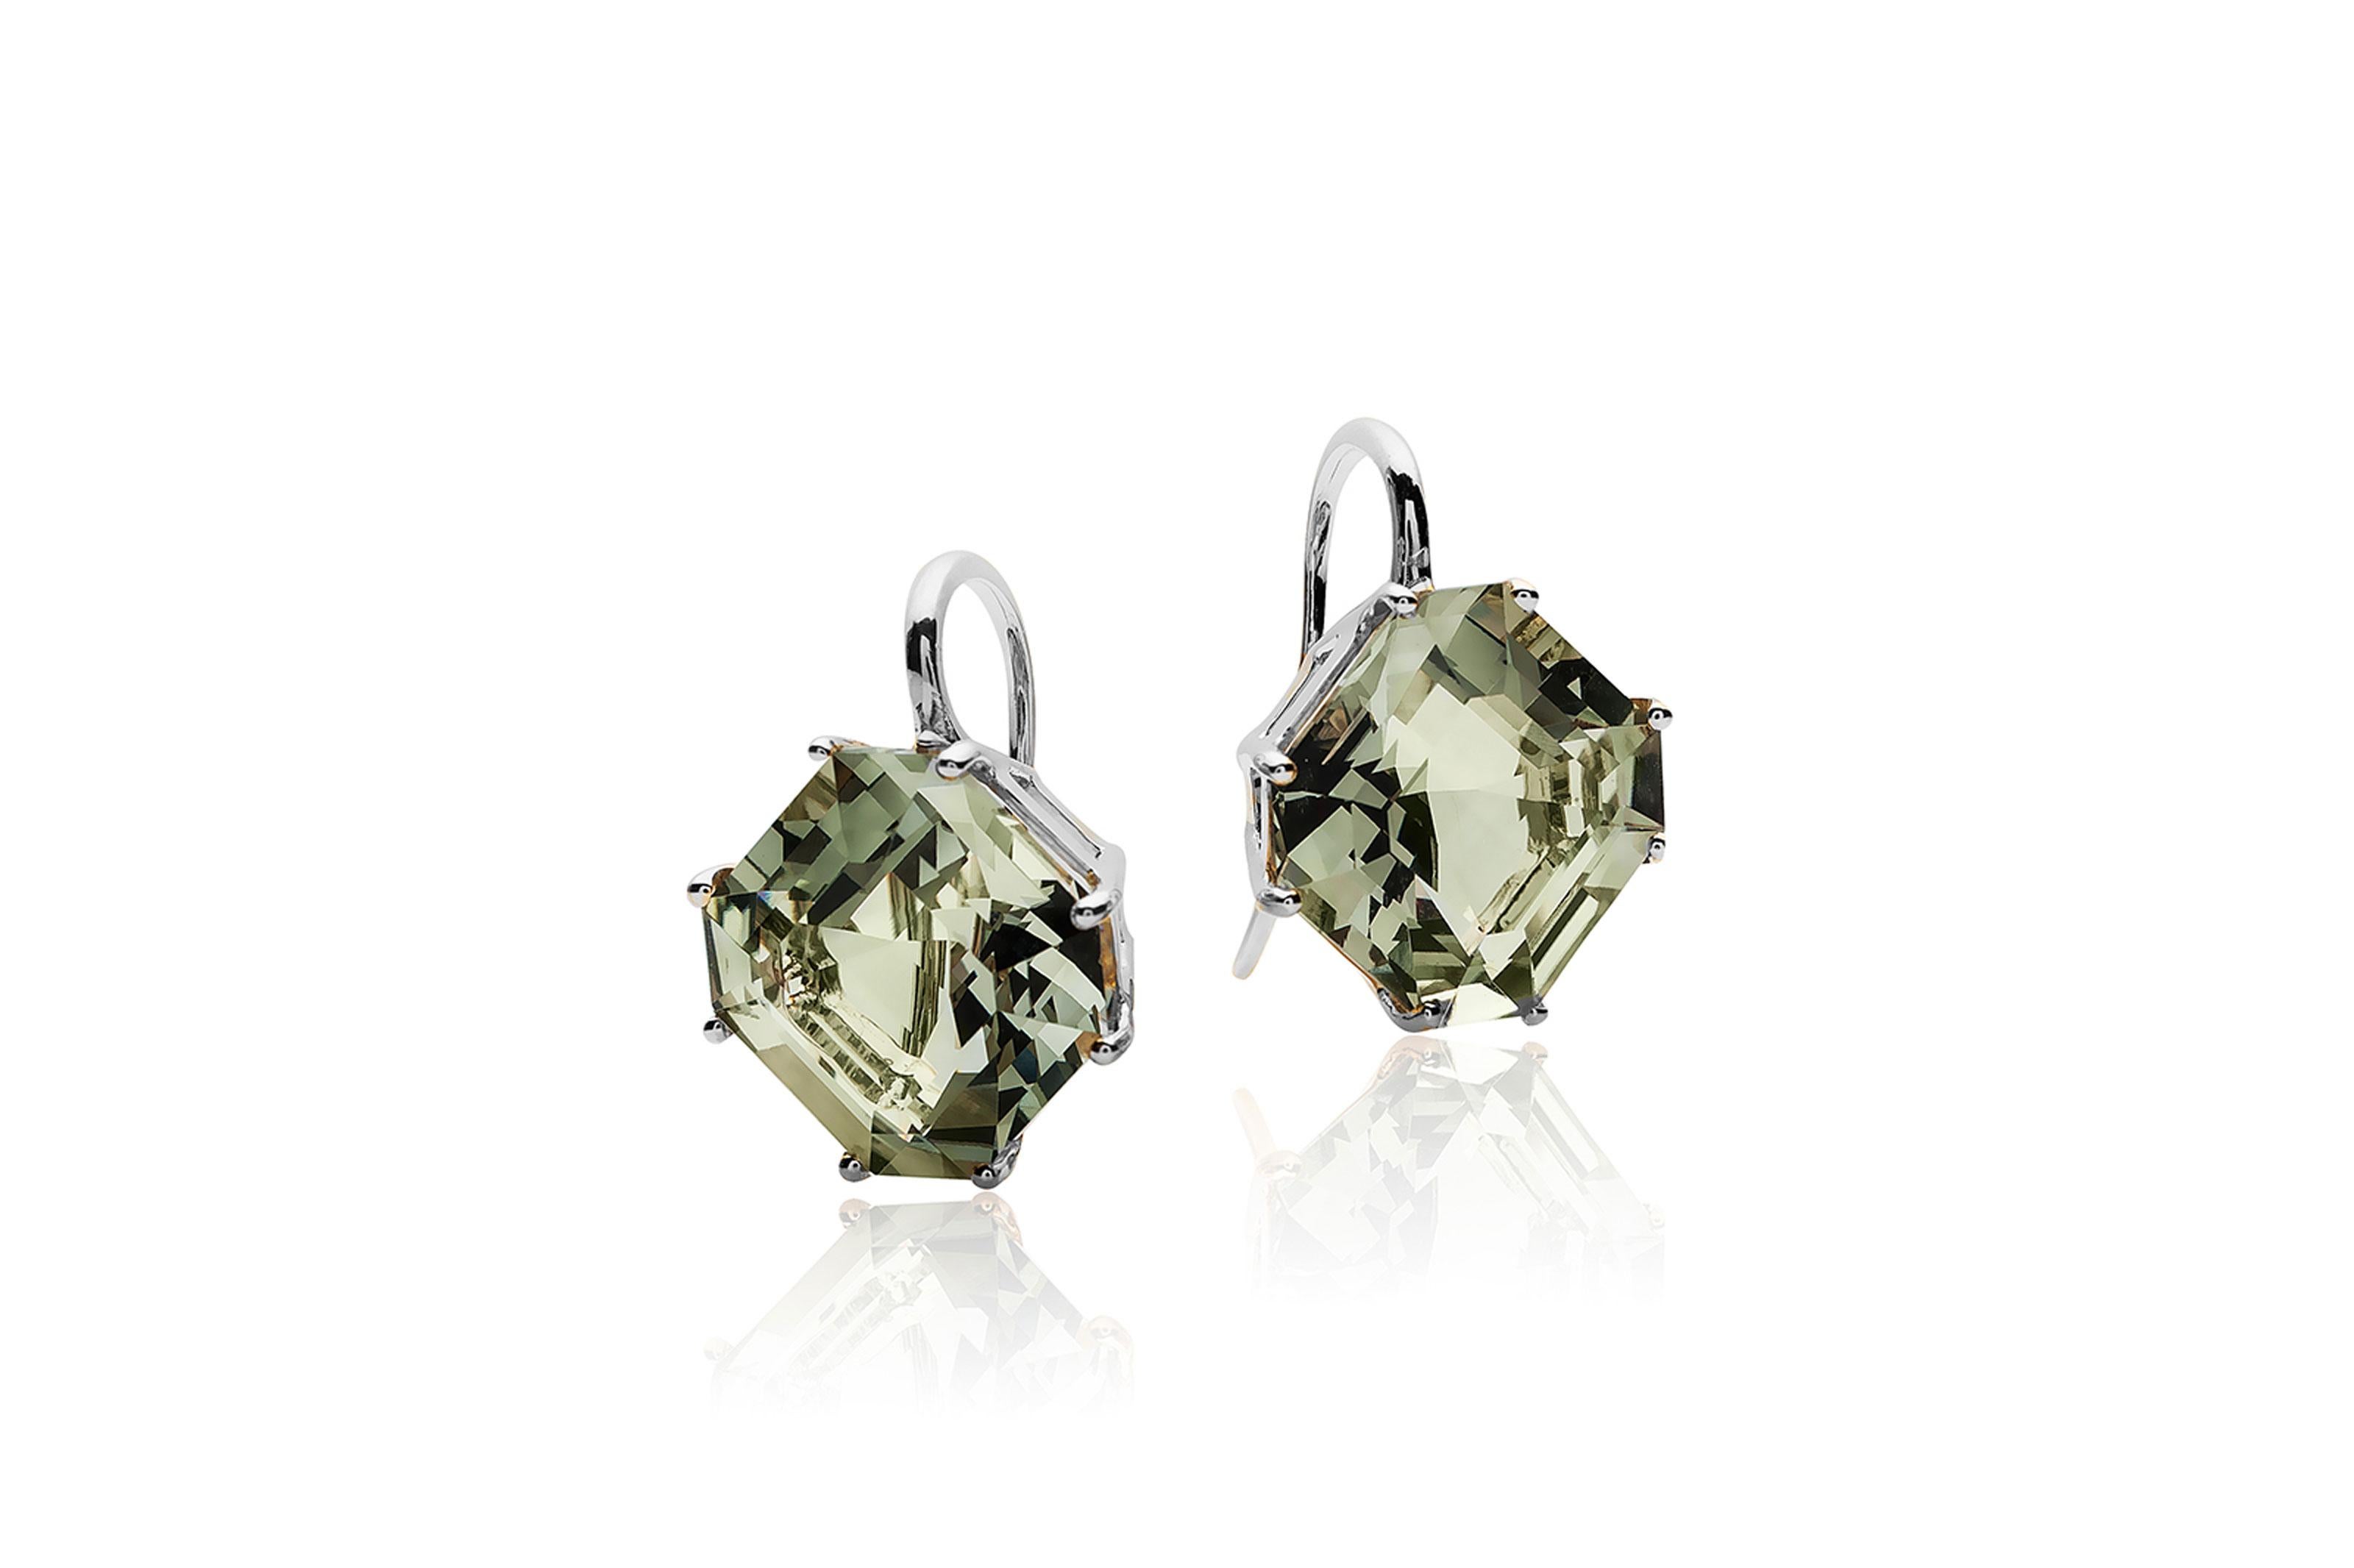 Introducing the exquisite Prasiolite Square Emerald Cut Earrings from 'Gossip' Collection. Crafted in 18K white gold, these earrings feature stunning square-cut Prasiolite gems suspended elegantly on French wires. The unique emerald cut of the